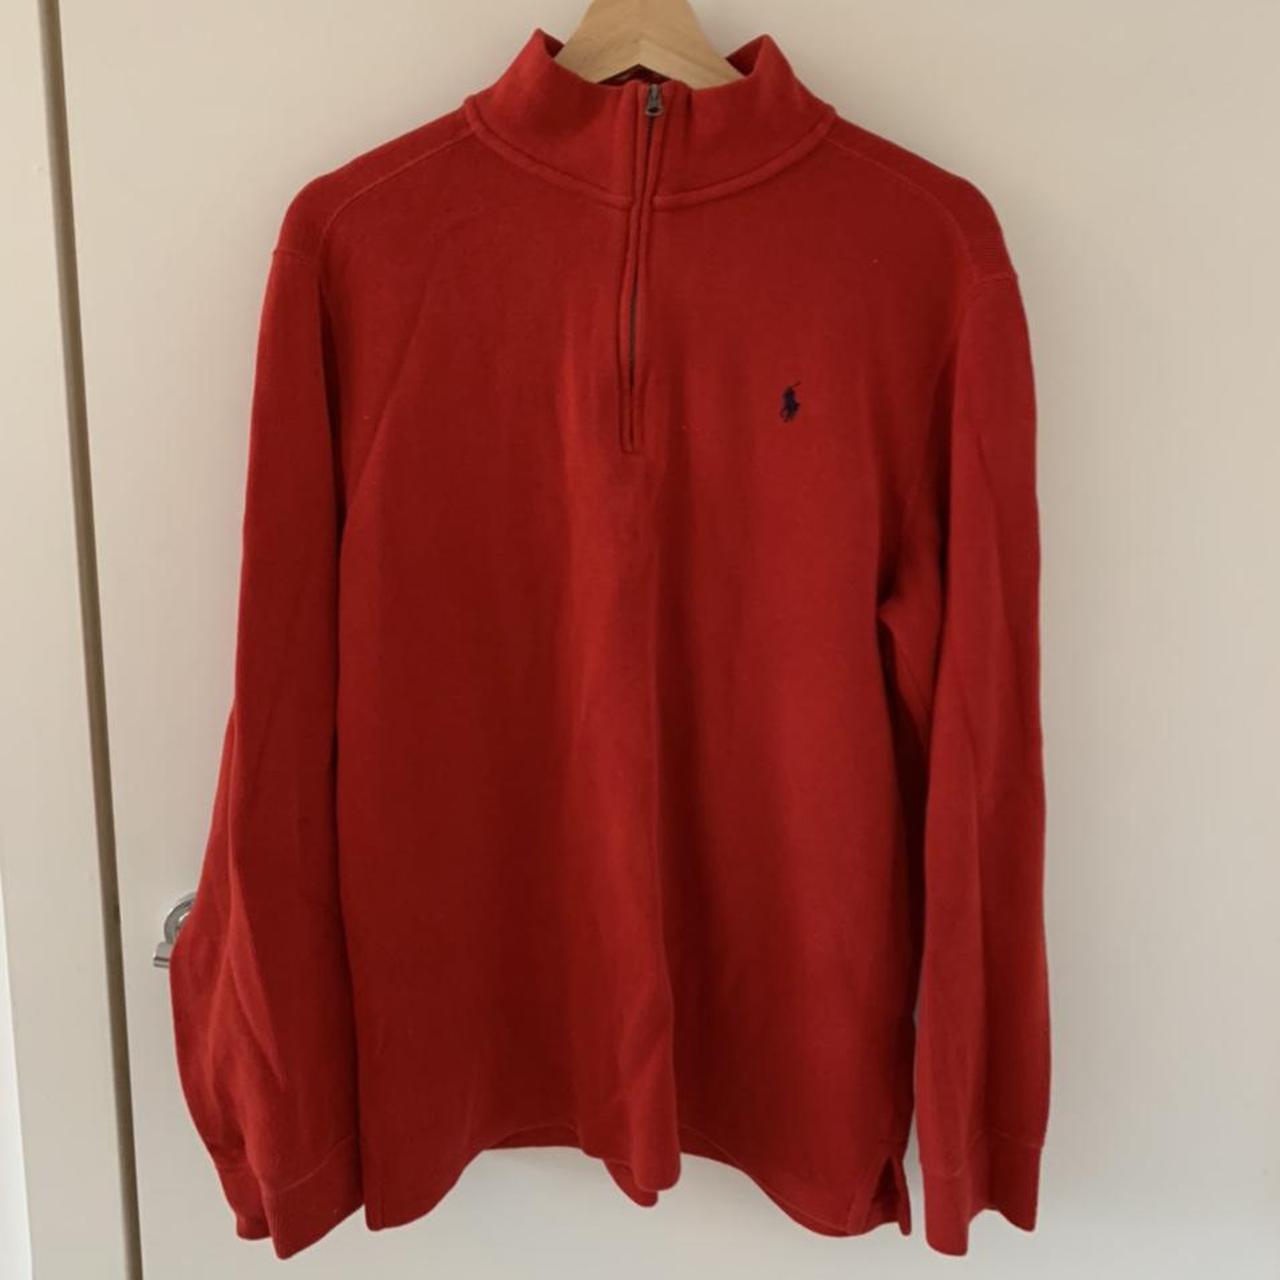 Product Image 1 - Please message before buying! 

Polo